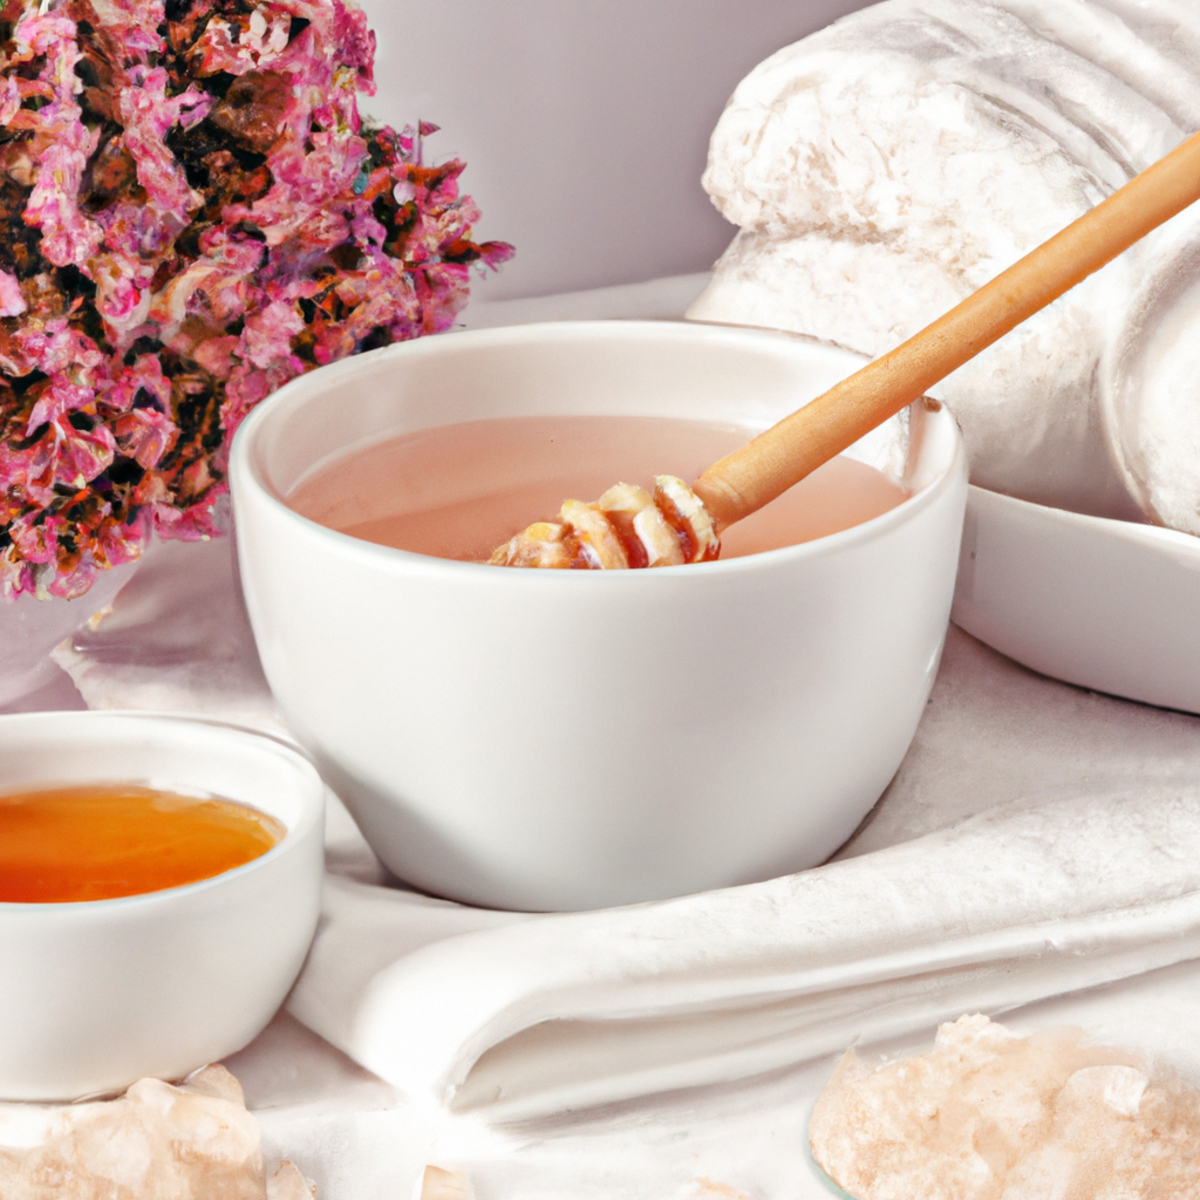 Indulge in the sweet simplicity of natural skin care routines with various cleansing and exfoliation methods. Try this Himalayan salt and coconut oil scrub, topped off with a dollop of honey for a touch of luxury. Your skin will thank you for the gentle exfoliation and nourishing ingredients, while your senses will be delighted by the fresh flowers and calming ambiance.